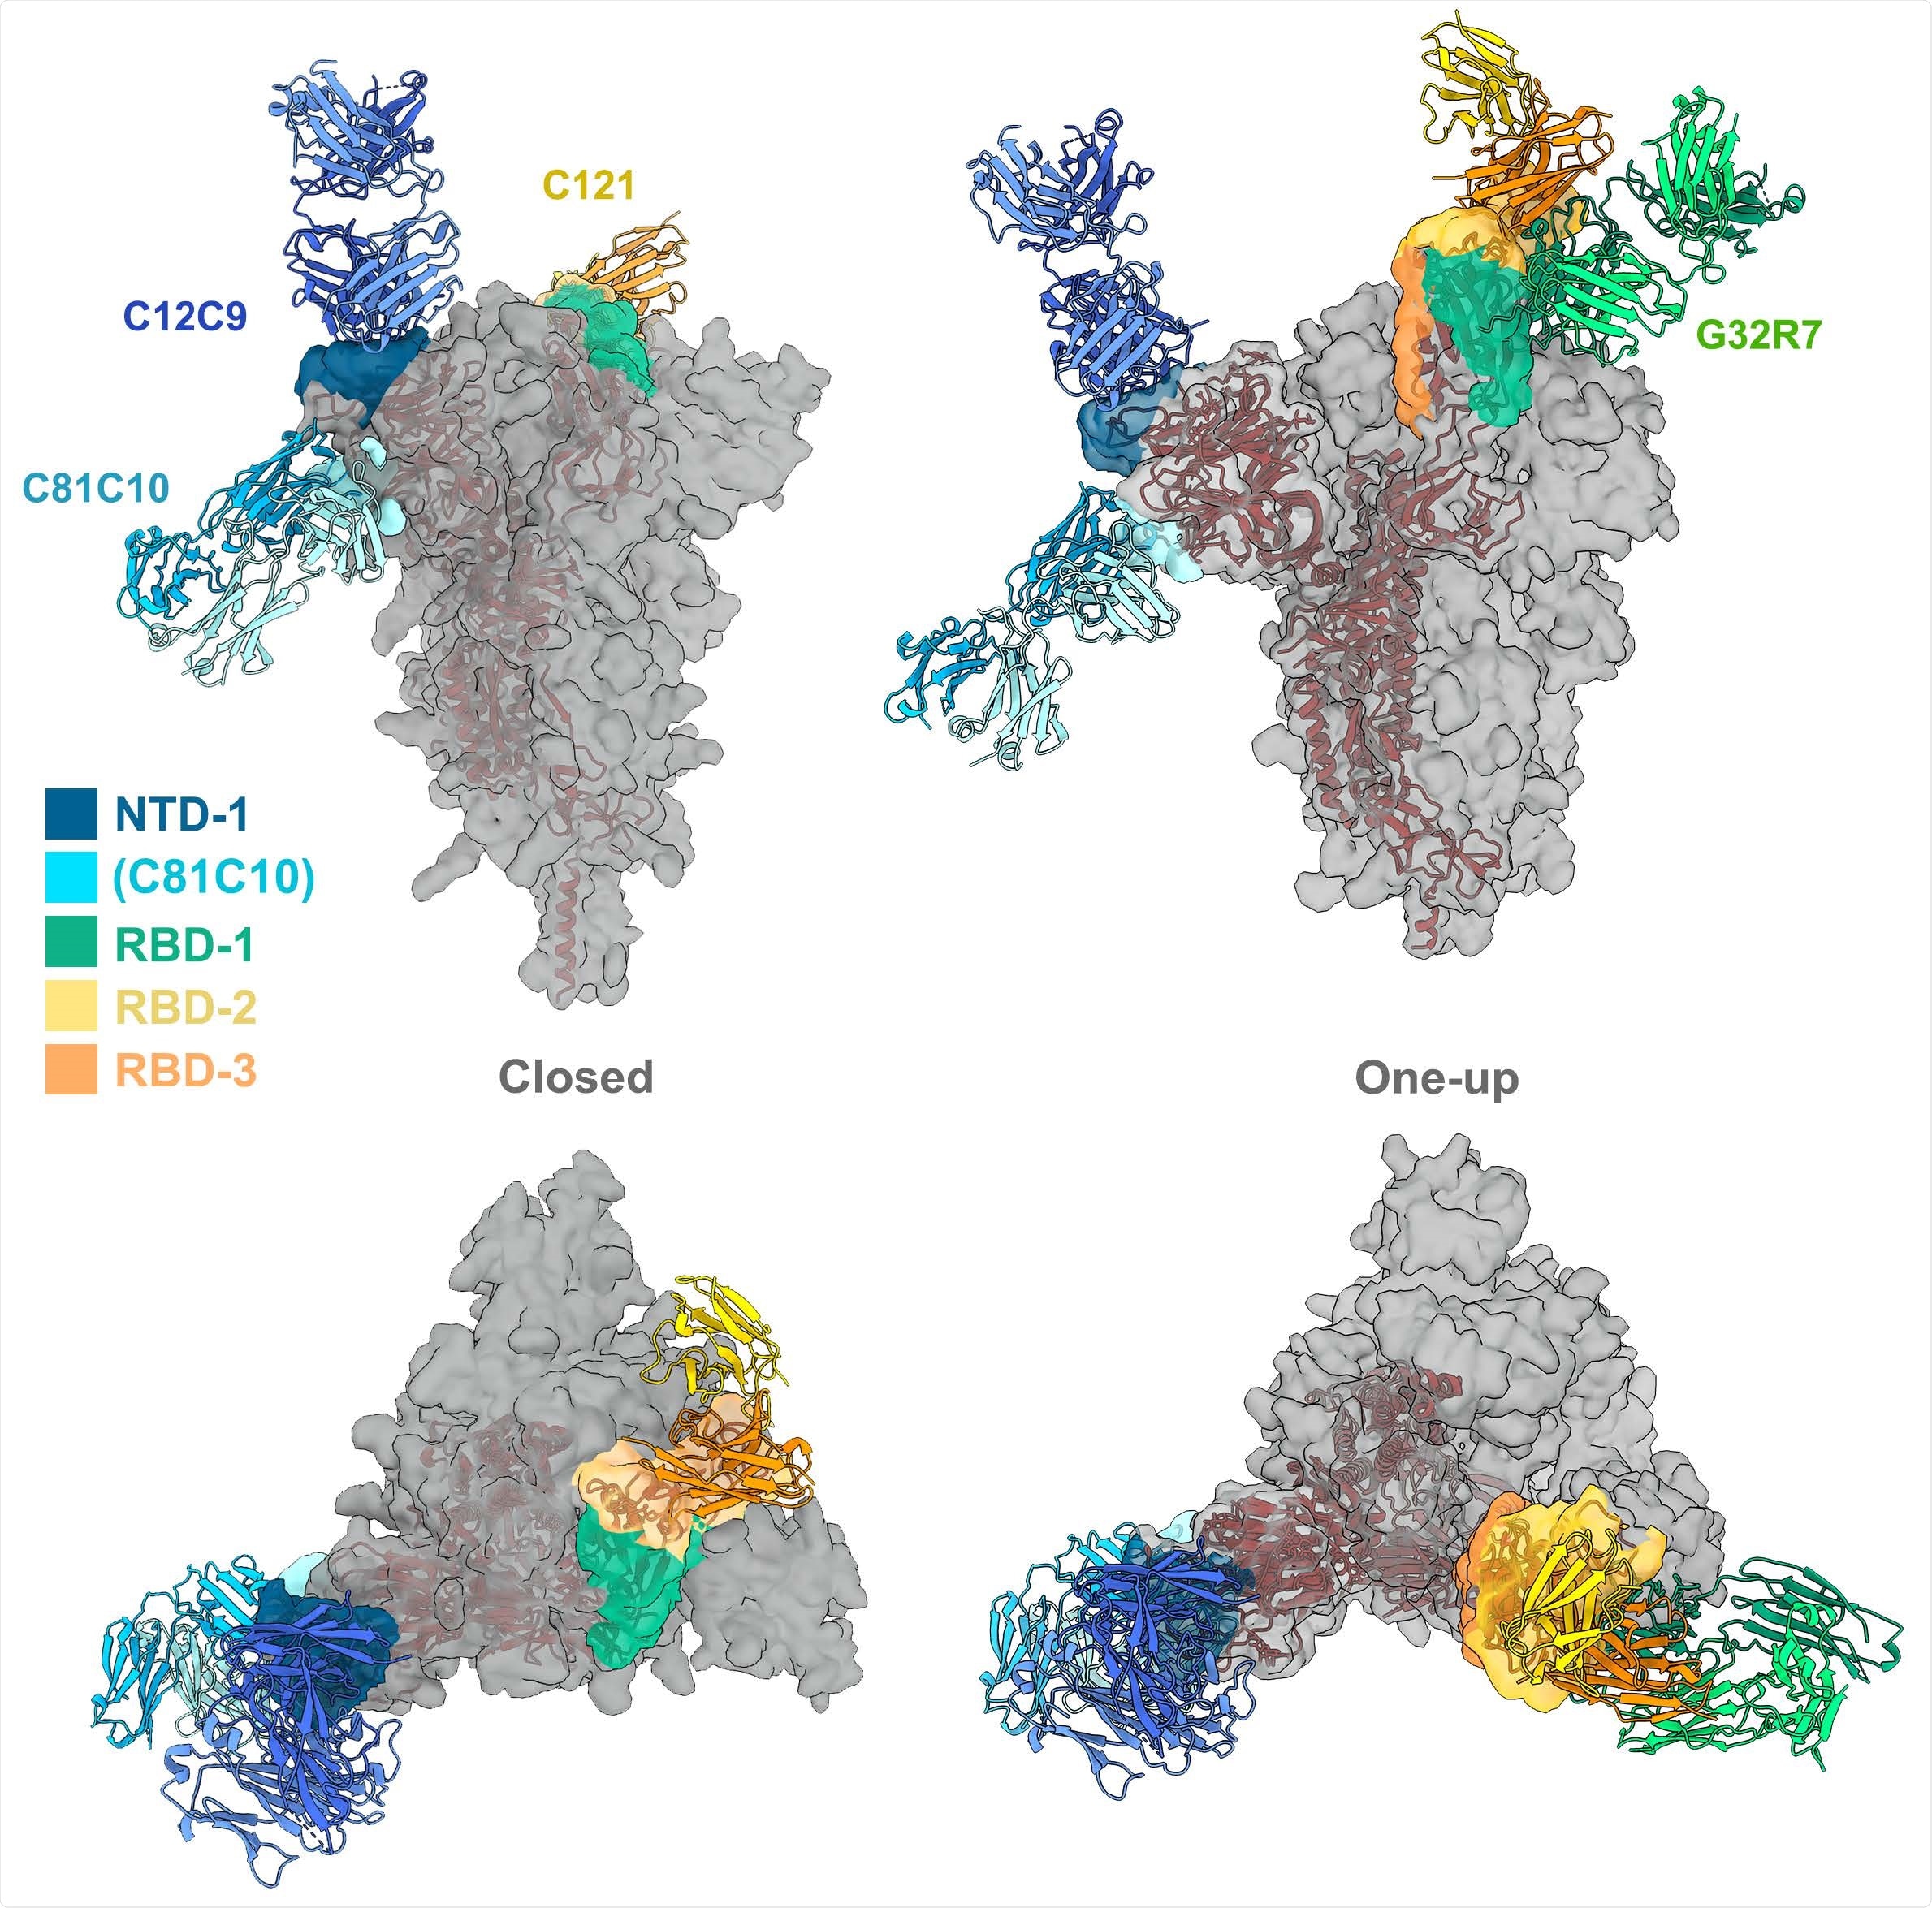 Ab contact regions. Surface regions of the SARS-CoV-2 spike protein trimer contacted by antibodies in four of the seven principal clusters, according to the color scheme shown (taken from the color scheme in Fig. 2), with a representative Fab for all except RBD-3. The C81C10 Fab defines an epitope just outside the margin of NTD-1, but it does not compete with any antibodies in RBD-2. The RBD-2 Fv shown is that of C121 (PDB ID: 7K8X: Barnes et al, 2020), which fits most closely, of the many published RBD-2 antibodies, into our low-resolution map for C12A2. Left: views normal to and along threefold axis of the closed, all-RBD-down conformation; right: similar views of the one-RBDup conformation. C121 (RBD-2) can bind both RBD down and RBD up; G32R7 (RBD-1) binds only the